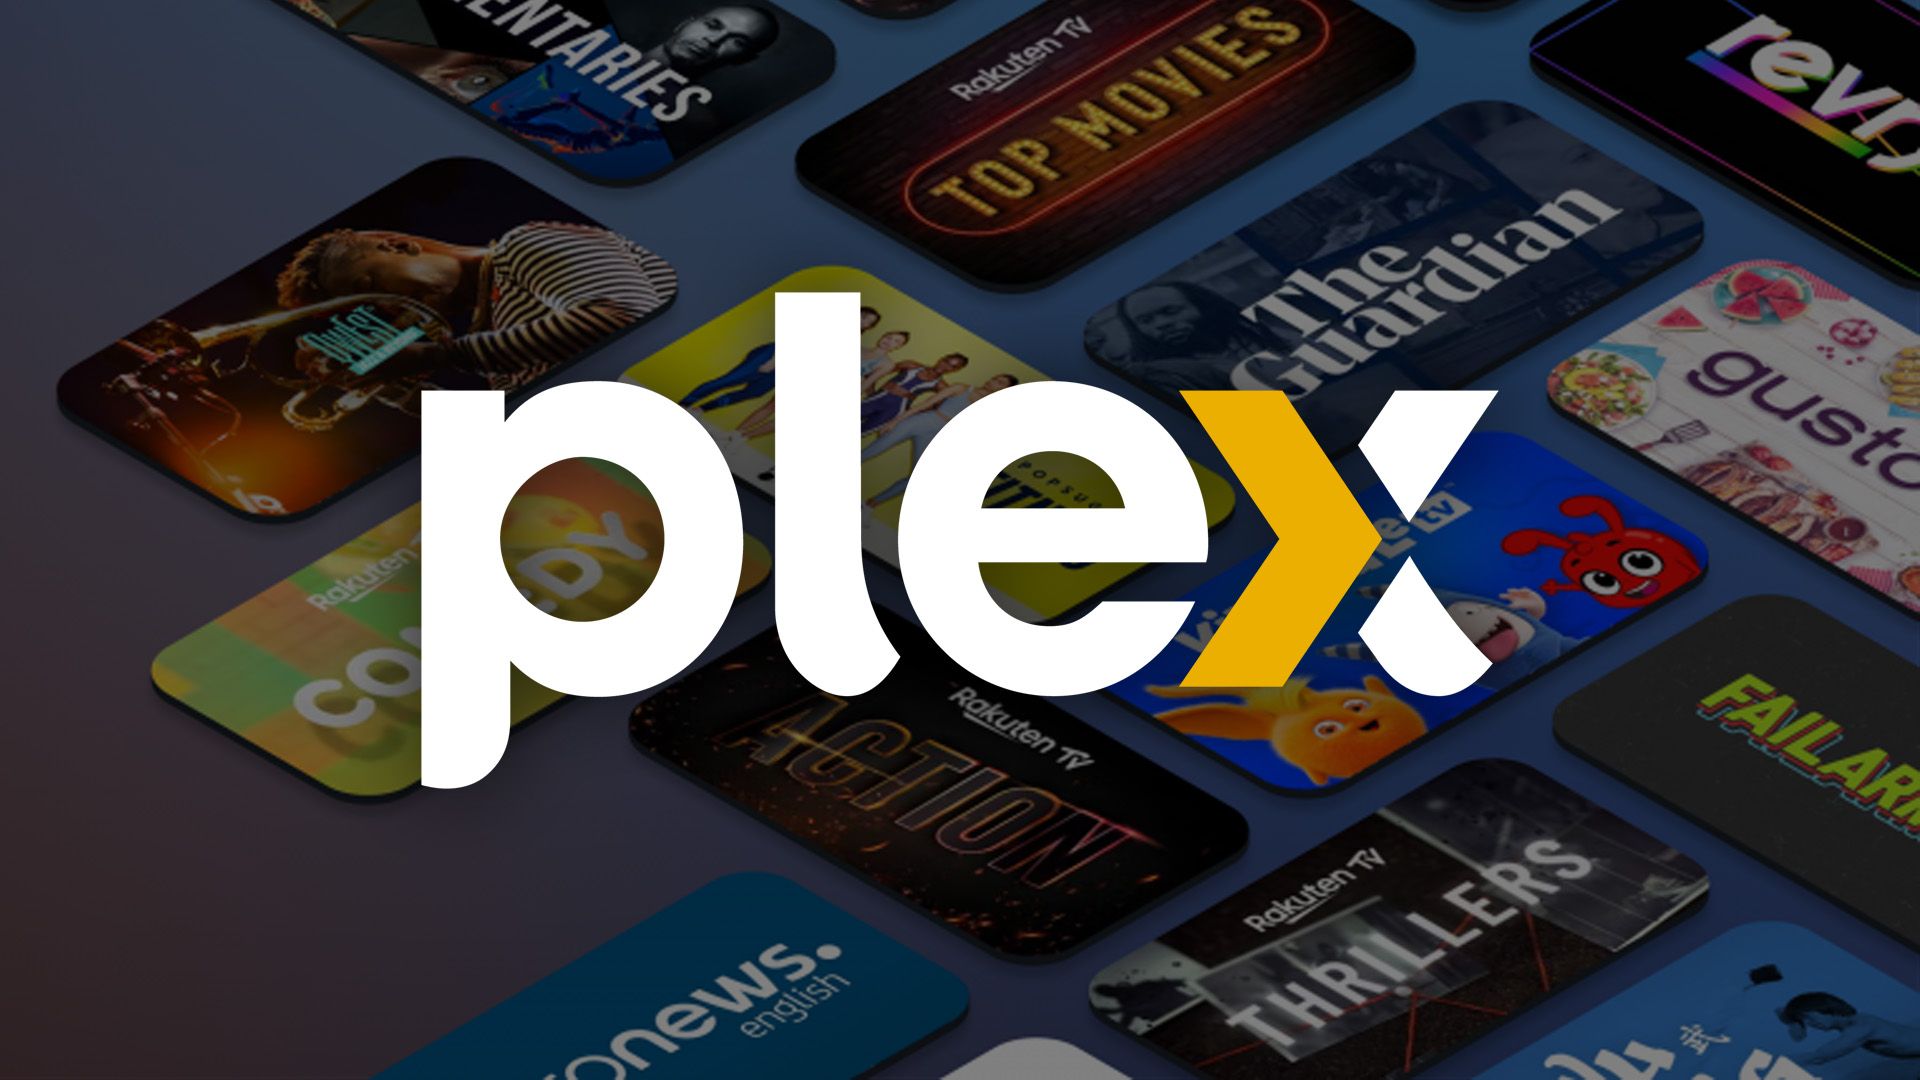 #Plexamp, The Plex Music Player, is Now Free for All